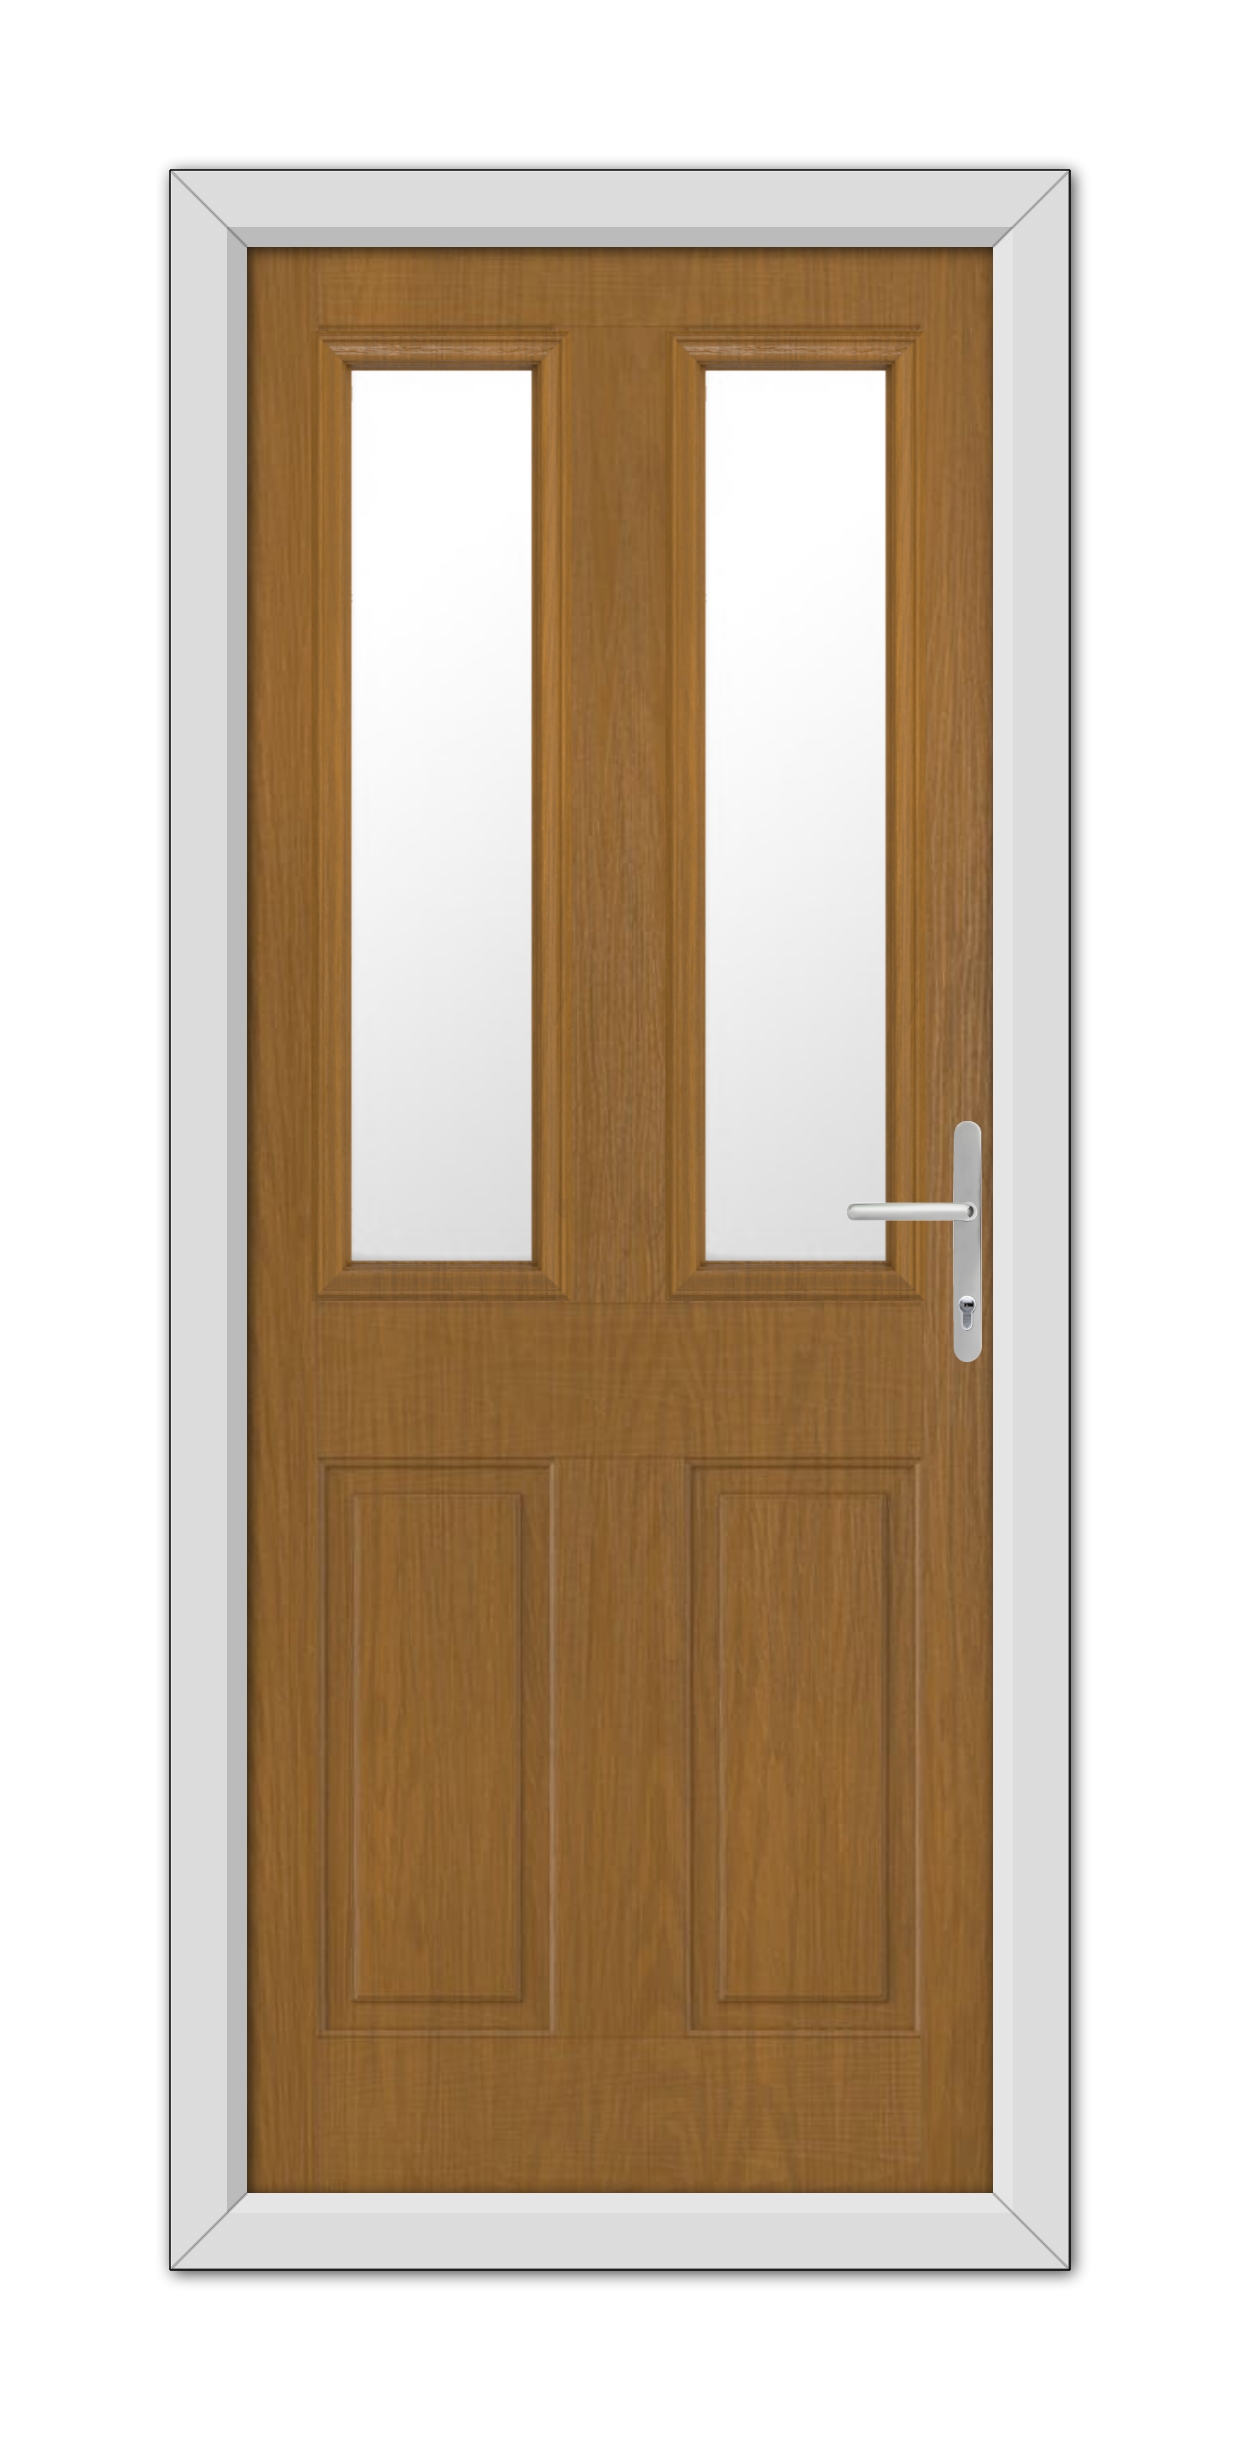 A Oak Whitmore Composite Double door with glass panels at the top half, a modern handle on the right, and framed in white.